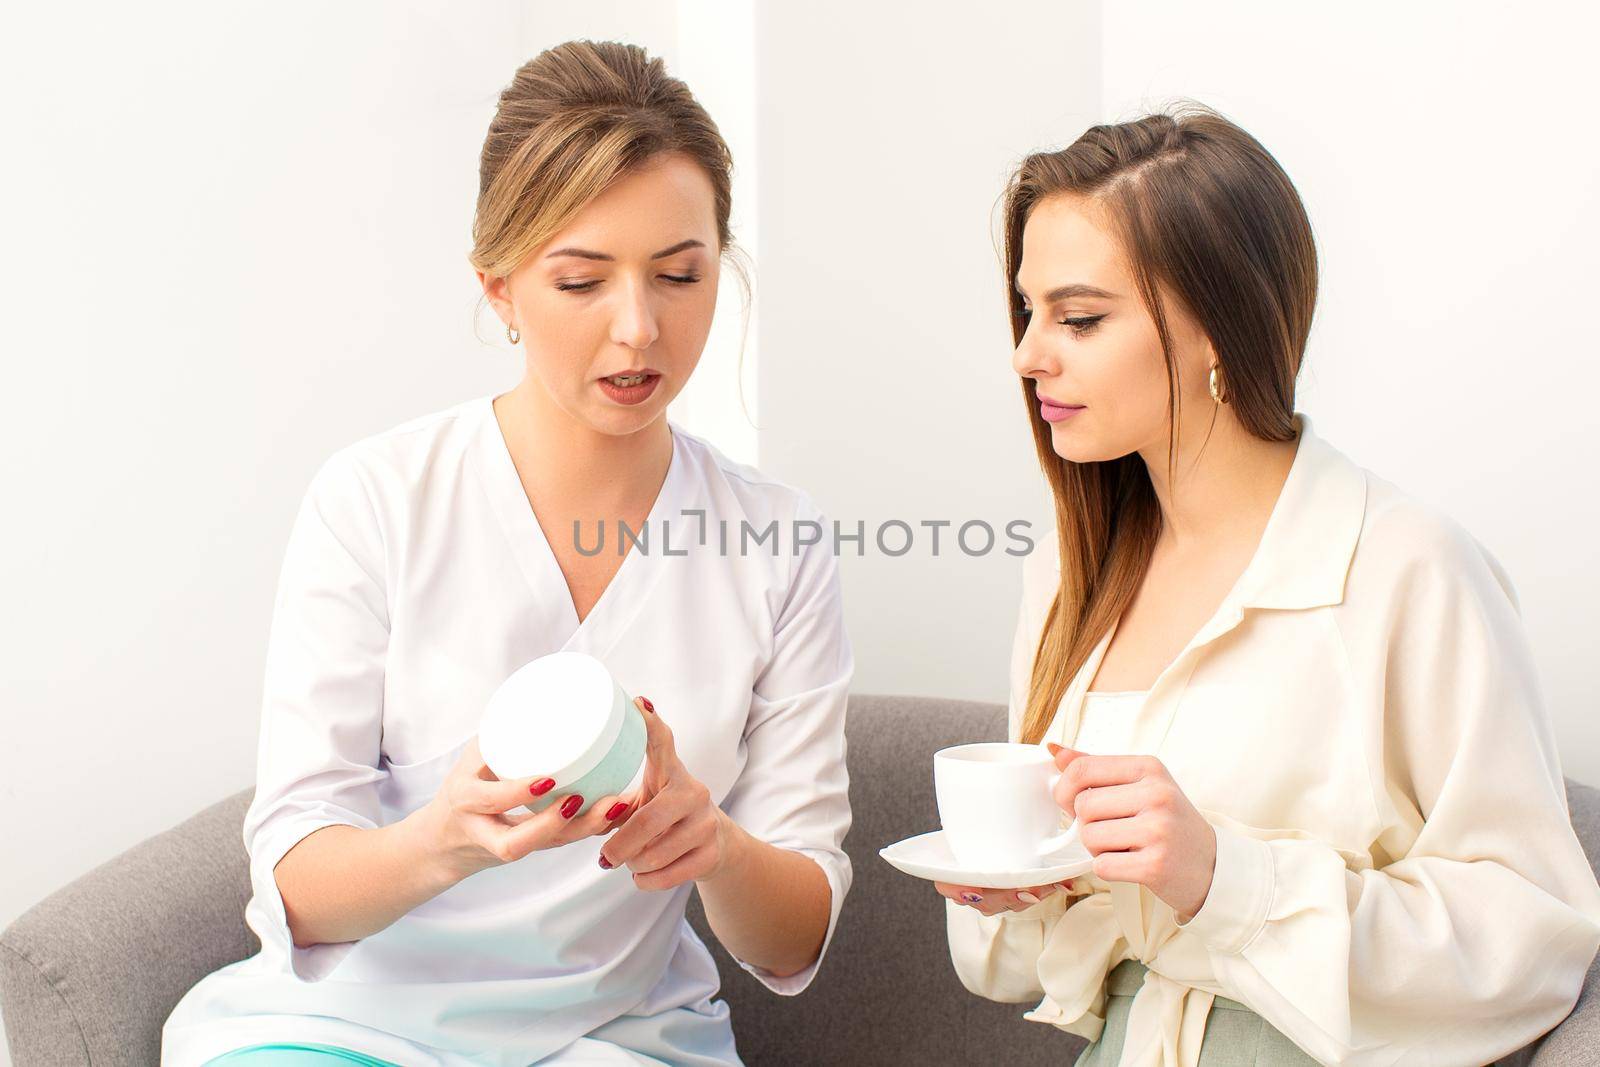 Beautician offering product for the young woman holding a white plastic jar with a cream sitting on the sofa